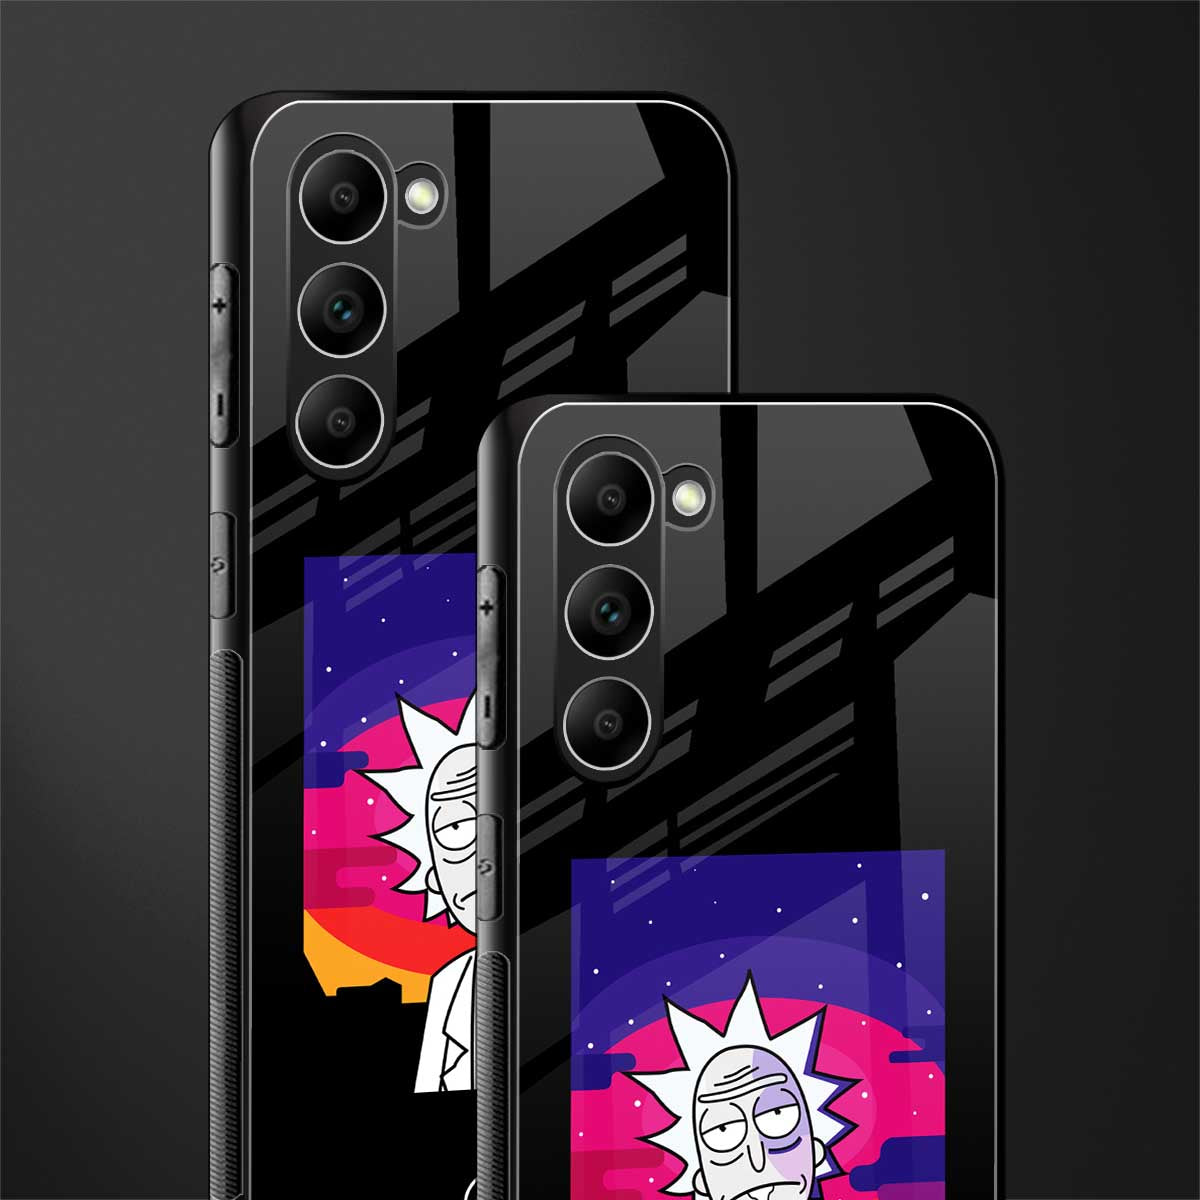 Trippy-Rick-Sanchez-Glass-Case for phone case | glass case for samsung galaxy s23